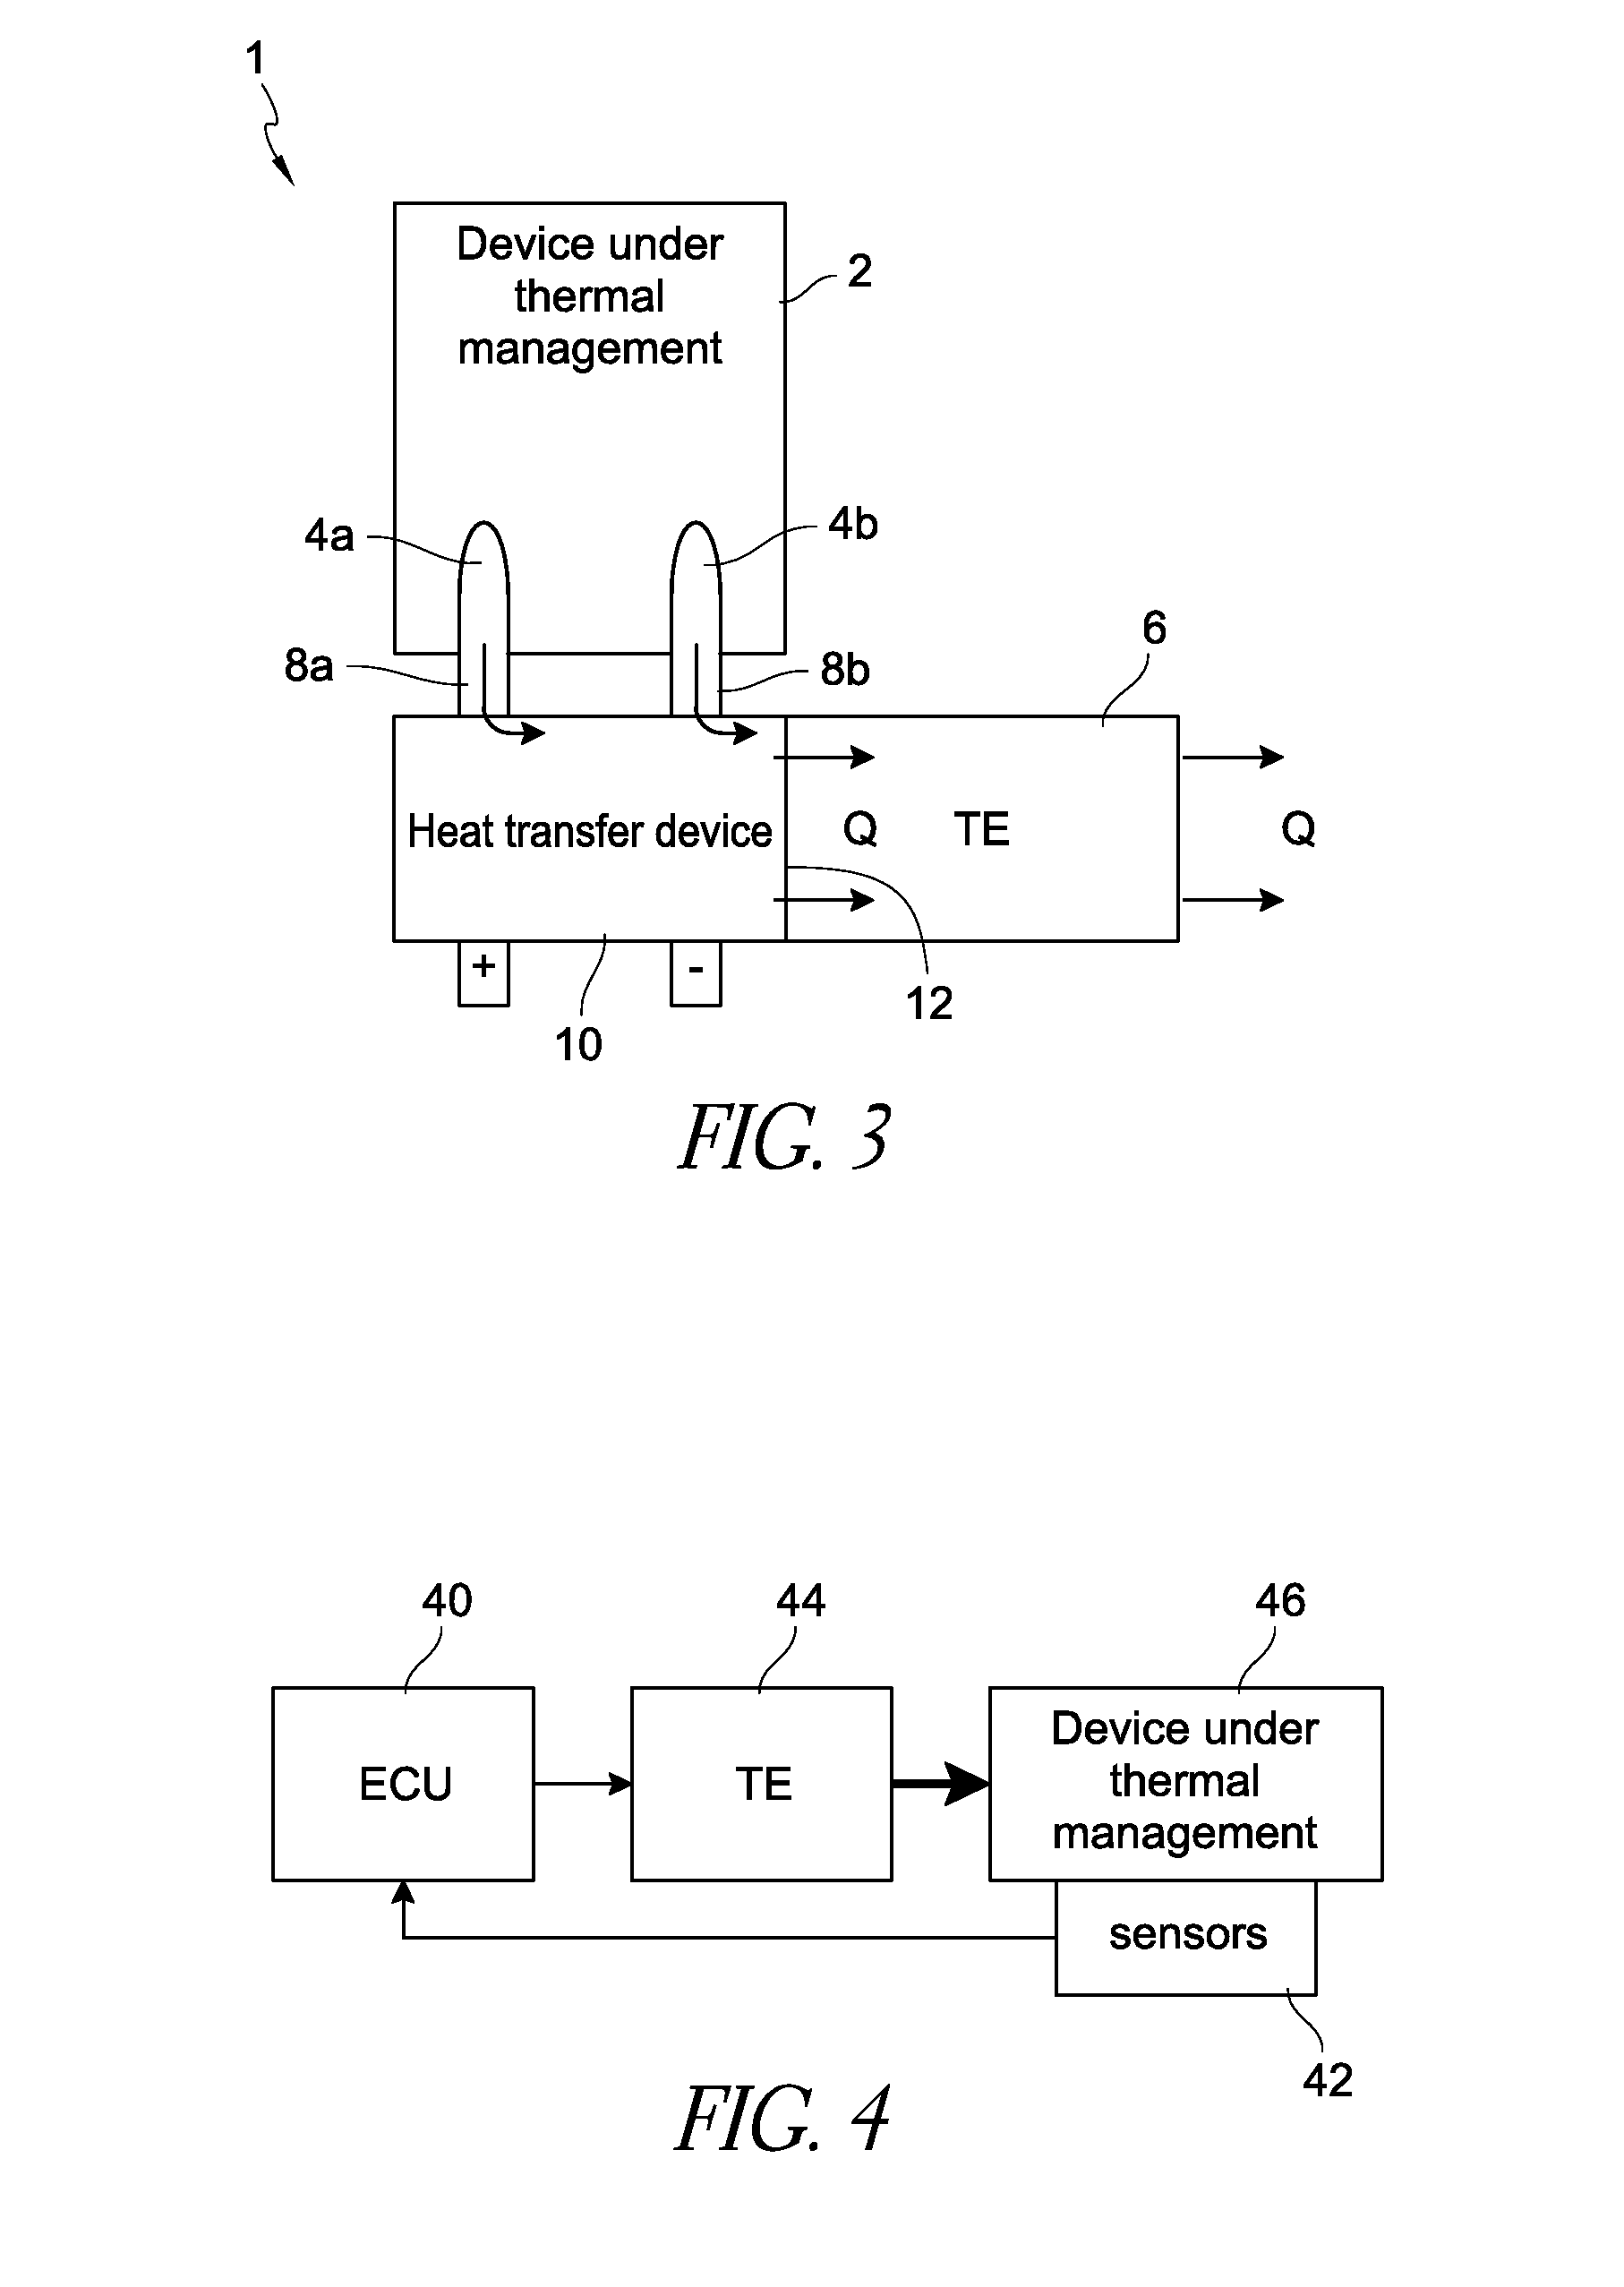 Thermoelectric-based thermal management of electrical devices